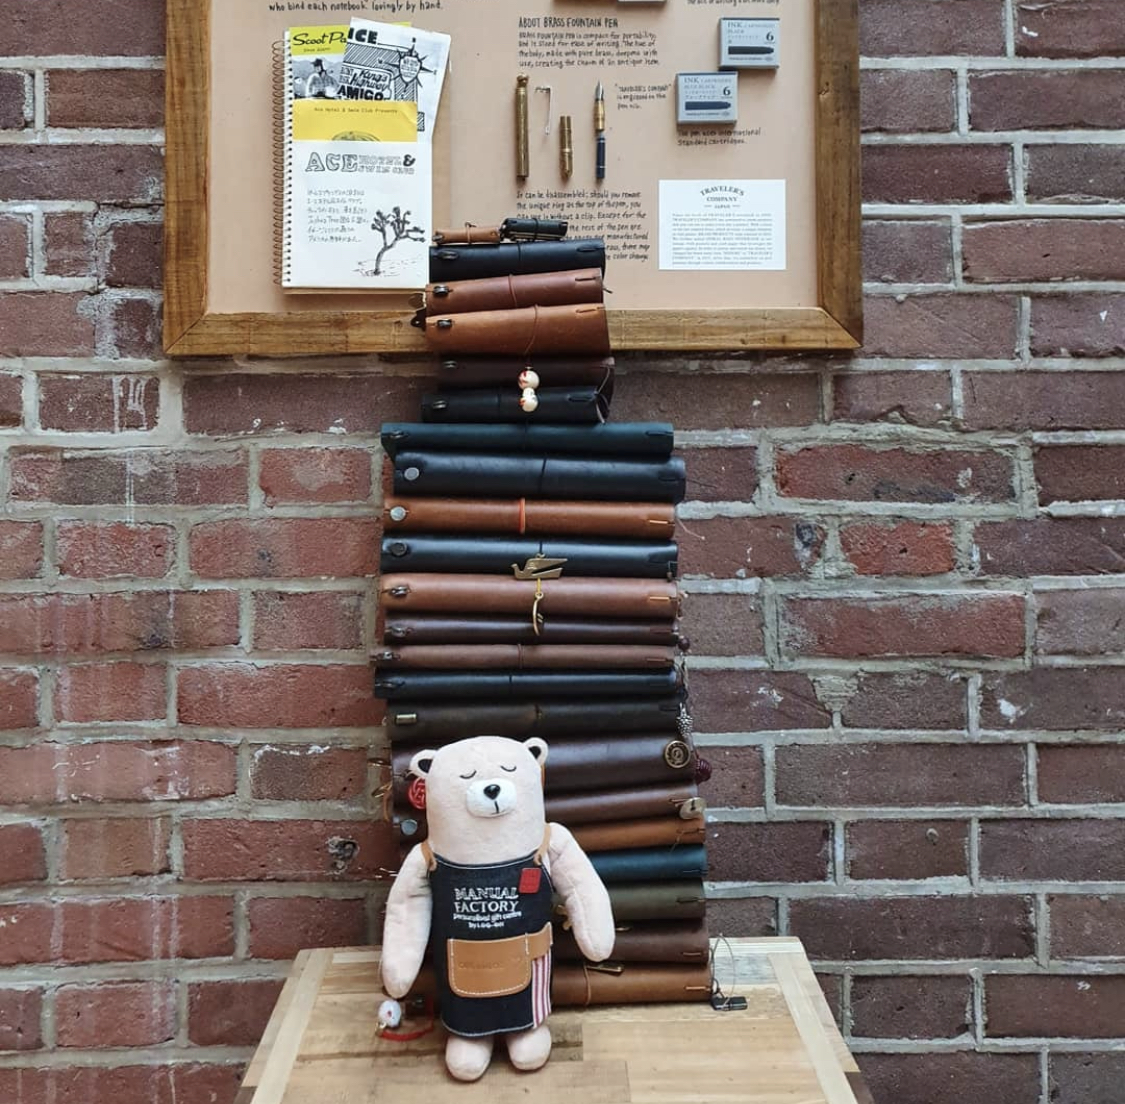 A stack of journals next to the Manual Factory Bear plush toy